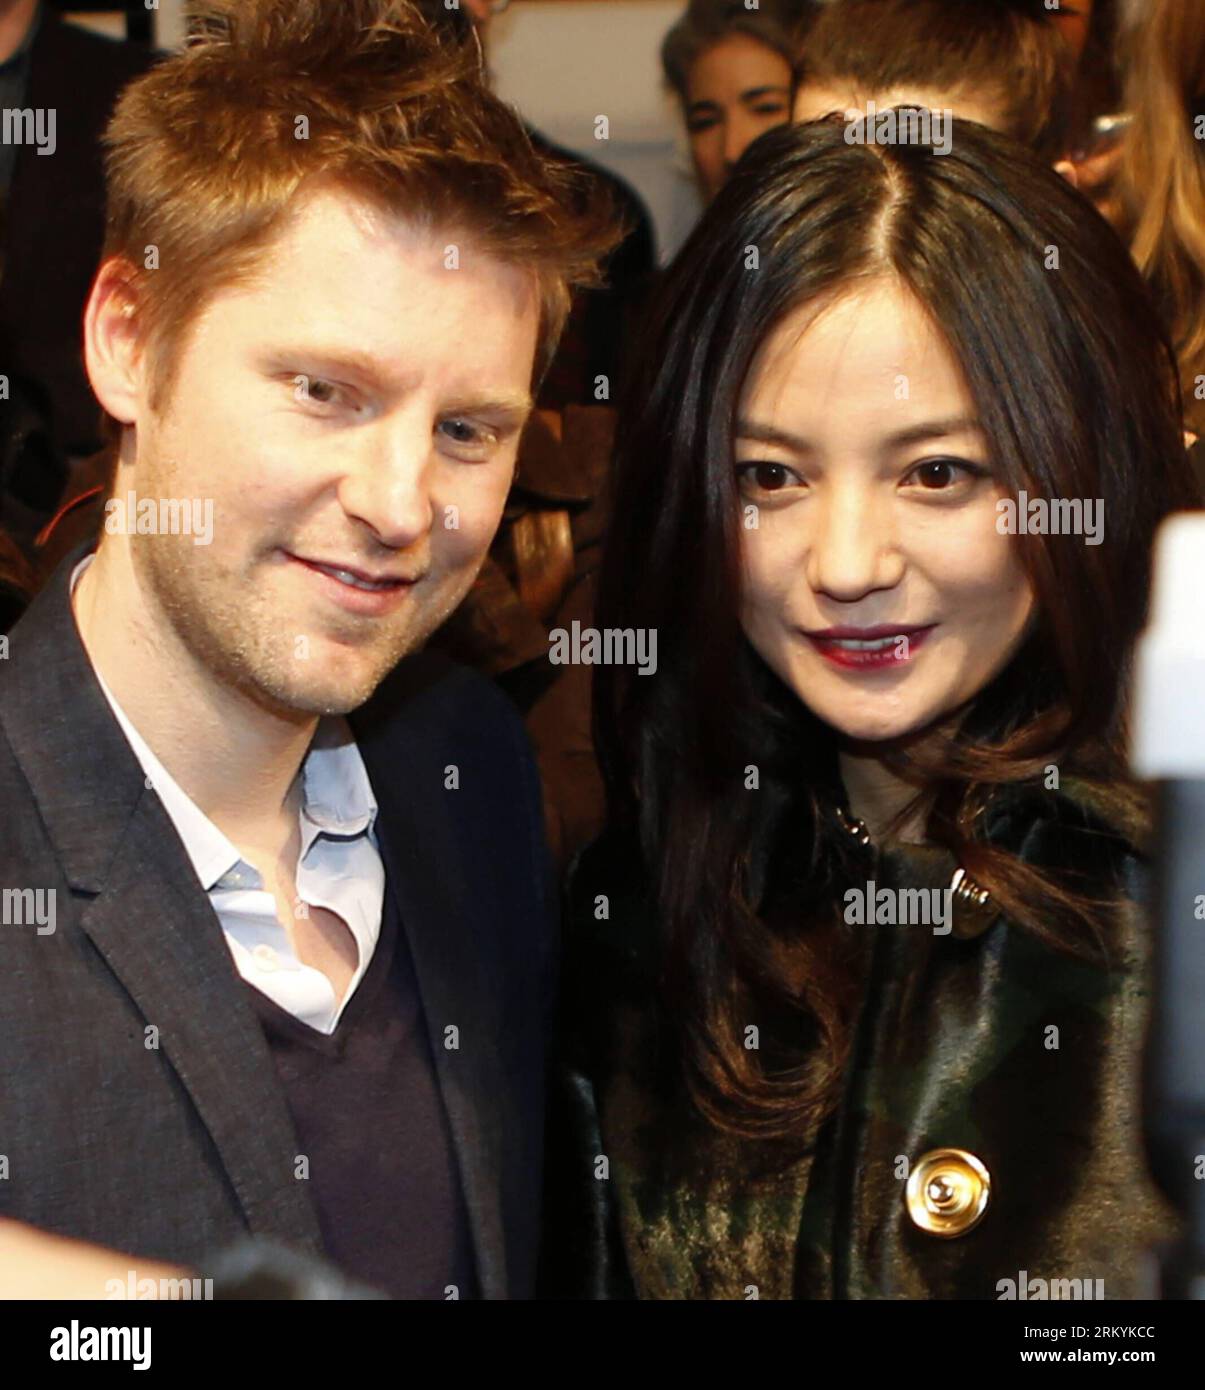 (130218) -- LONDON, Feb. 18, 2013 (Xinhua) -- Actress Zhao Wei (R) poses with Christopher Bailey, the Chief Creative Officer of Burberry, after the Burberry Prorsum Autumn/Winter 2013 Womenswear Show at Kensington Gardens during London Fashion Week in London, Britain, on Feb. 18, 2013.(Xinhua/Wang Lili) BRITAIN-LONDON-FASHION WEEK-BURBERRY PRORSUM PUBLICATIONxNOTxINxCHN Stock Photo